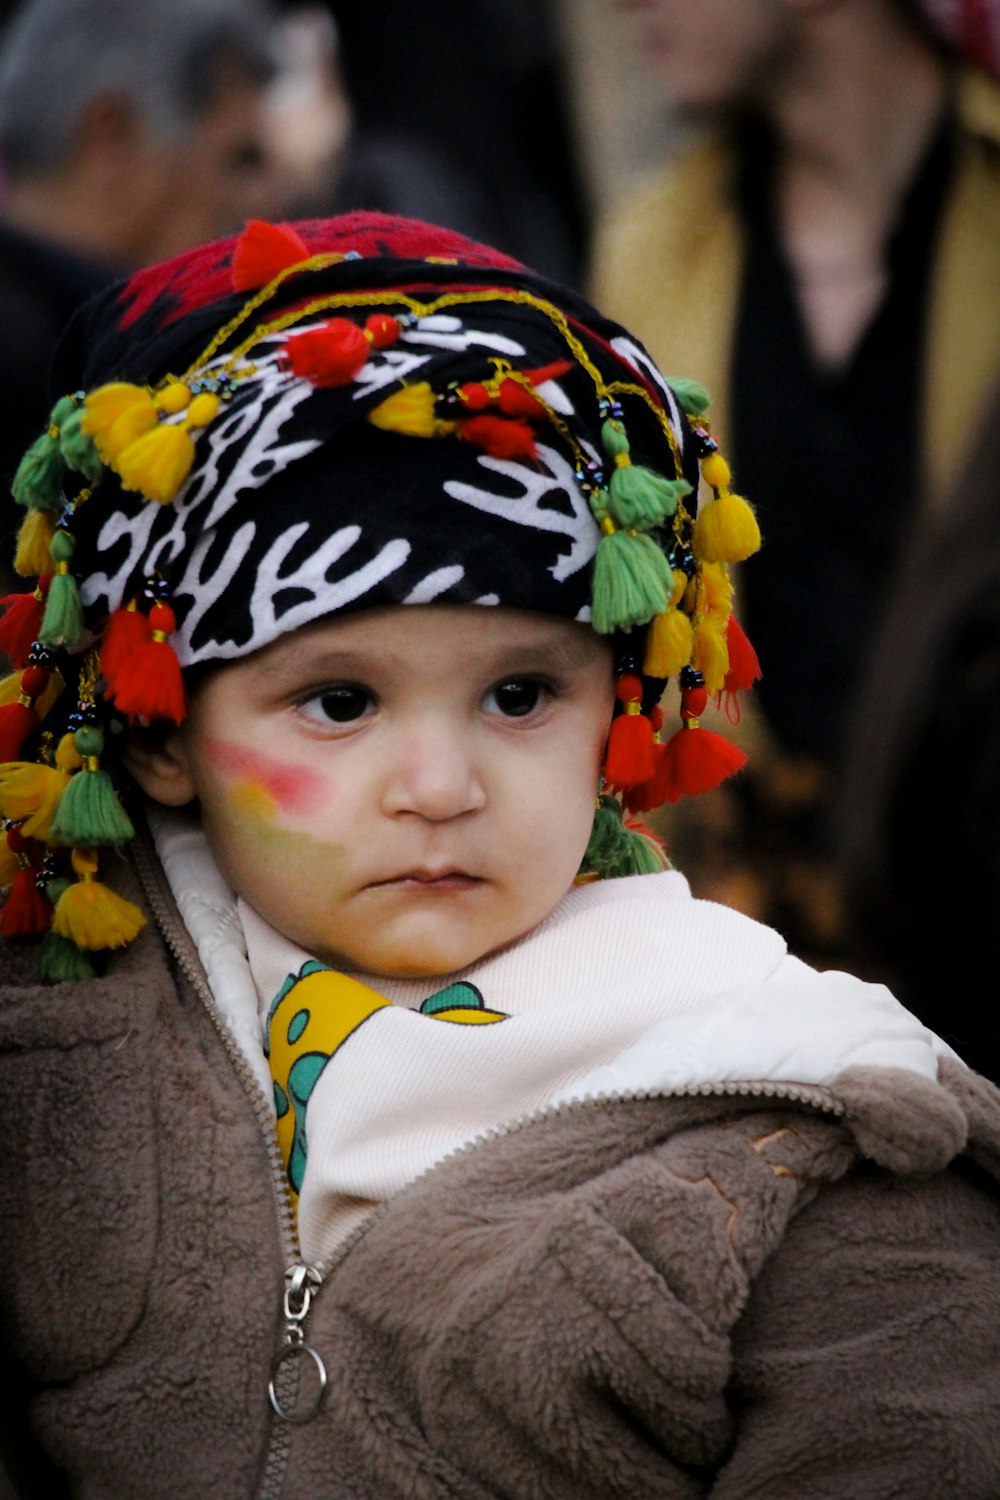 a young child with a painted face wearing a hat